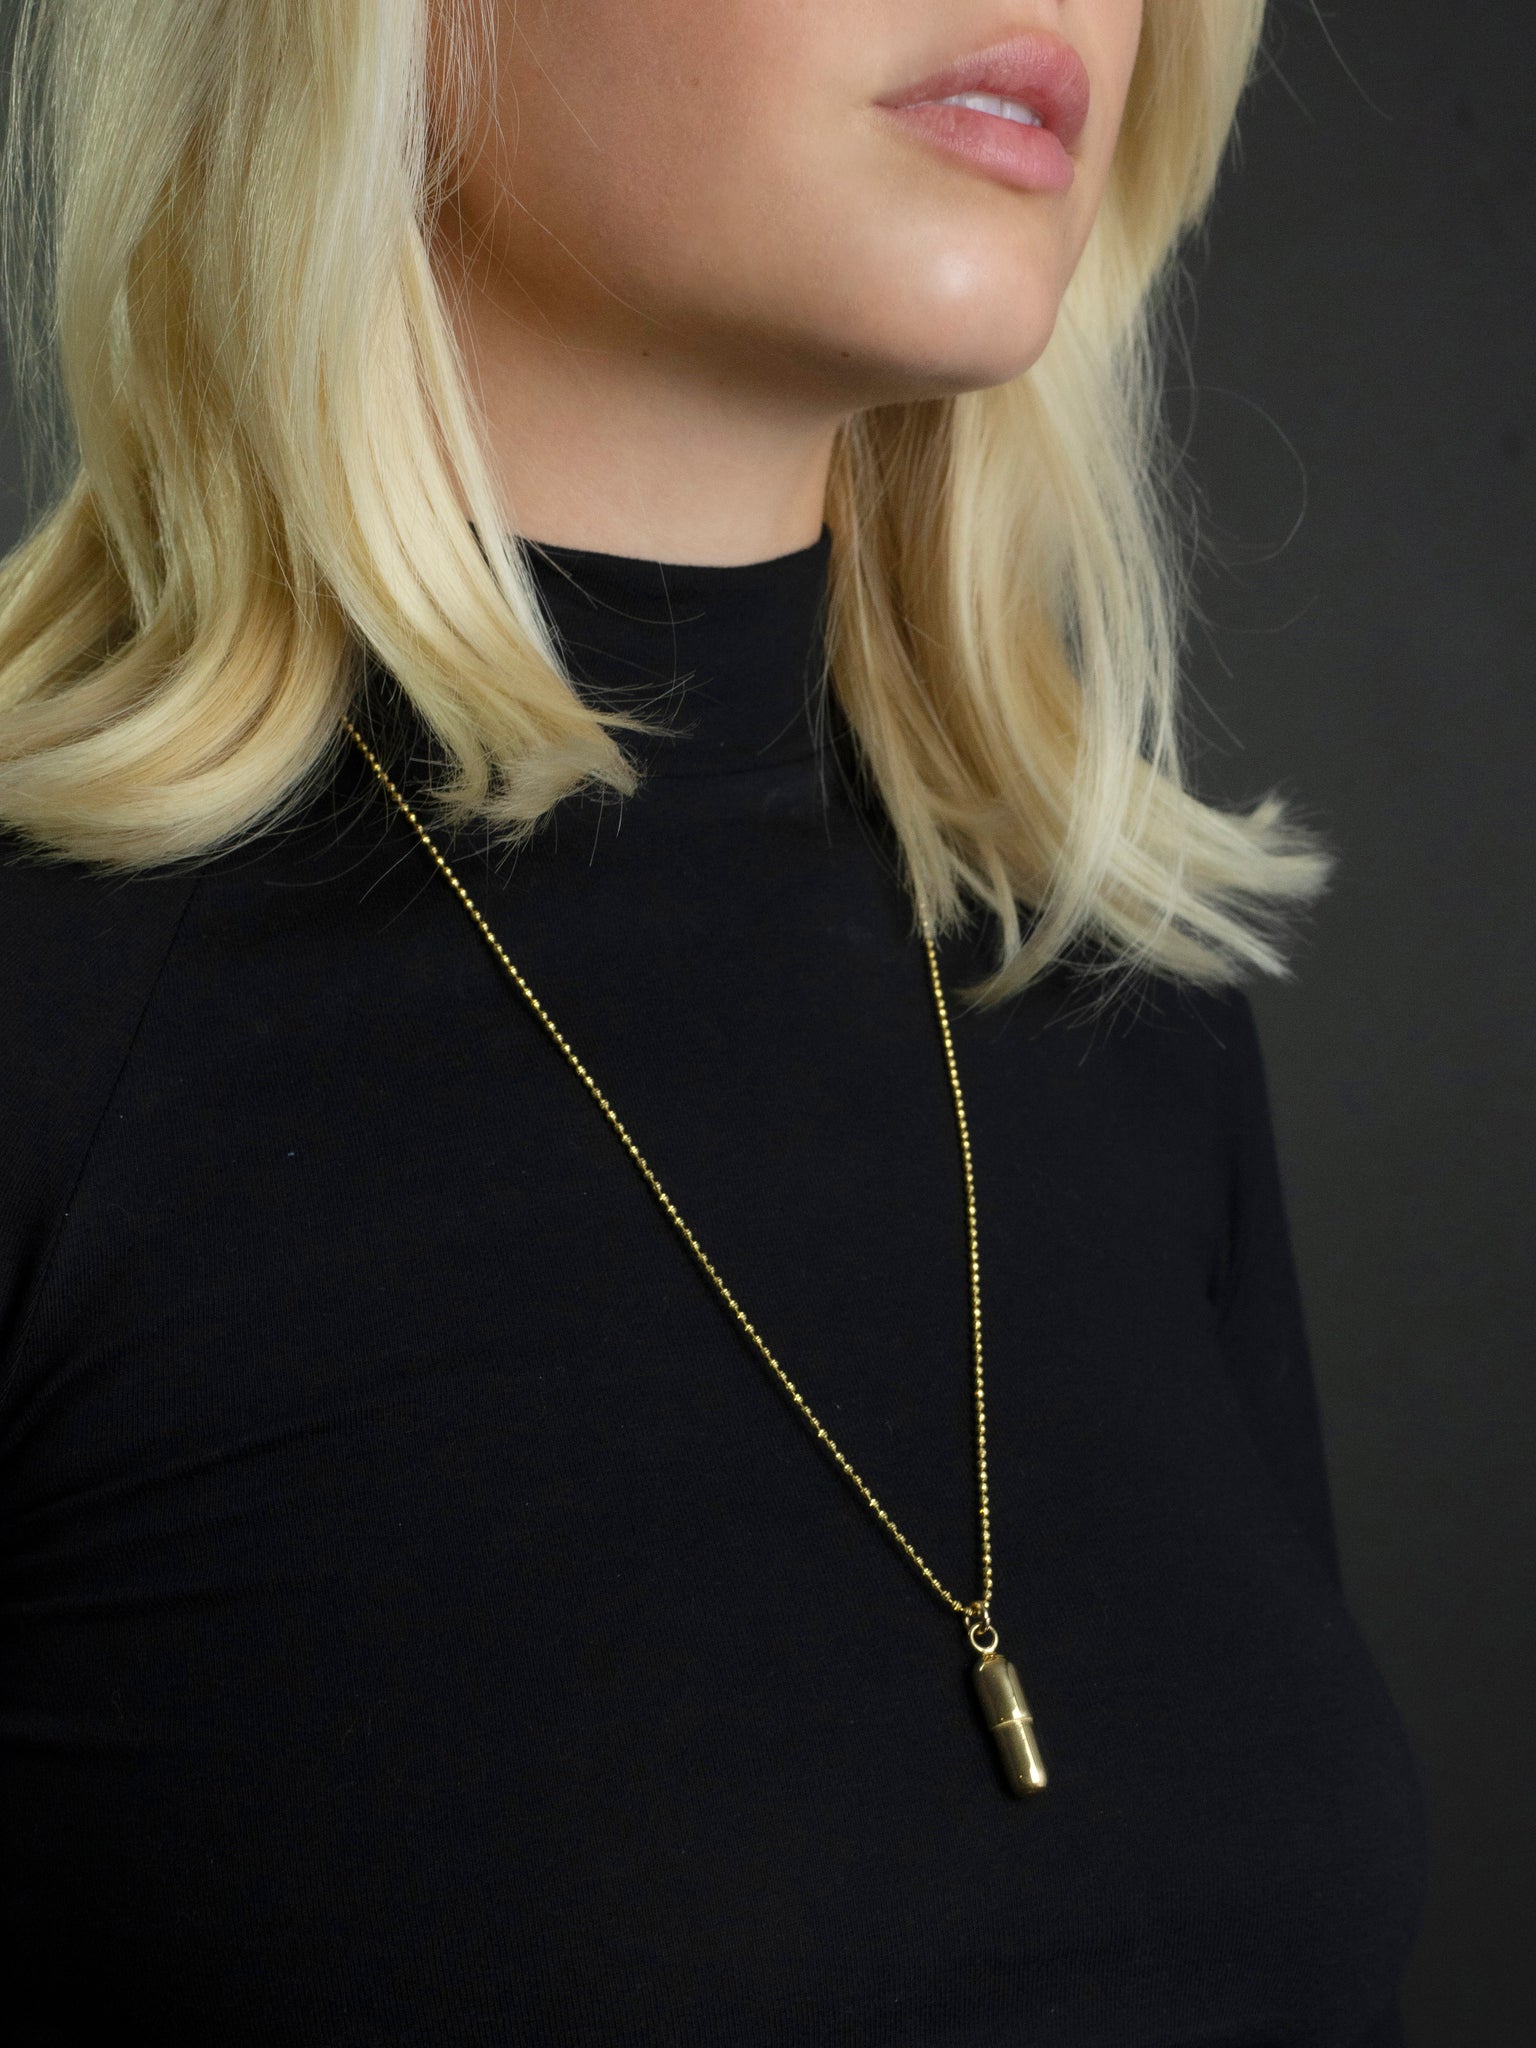 Gold Capsule Pill Necklace